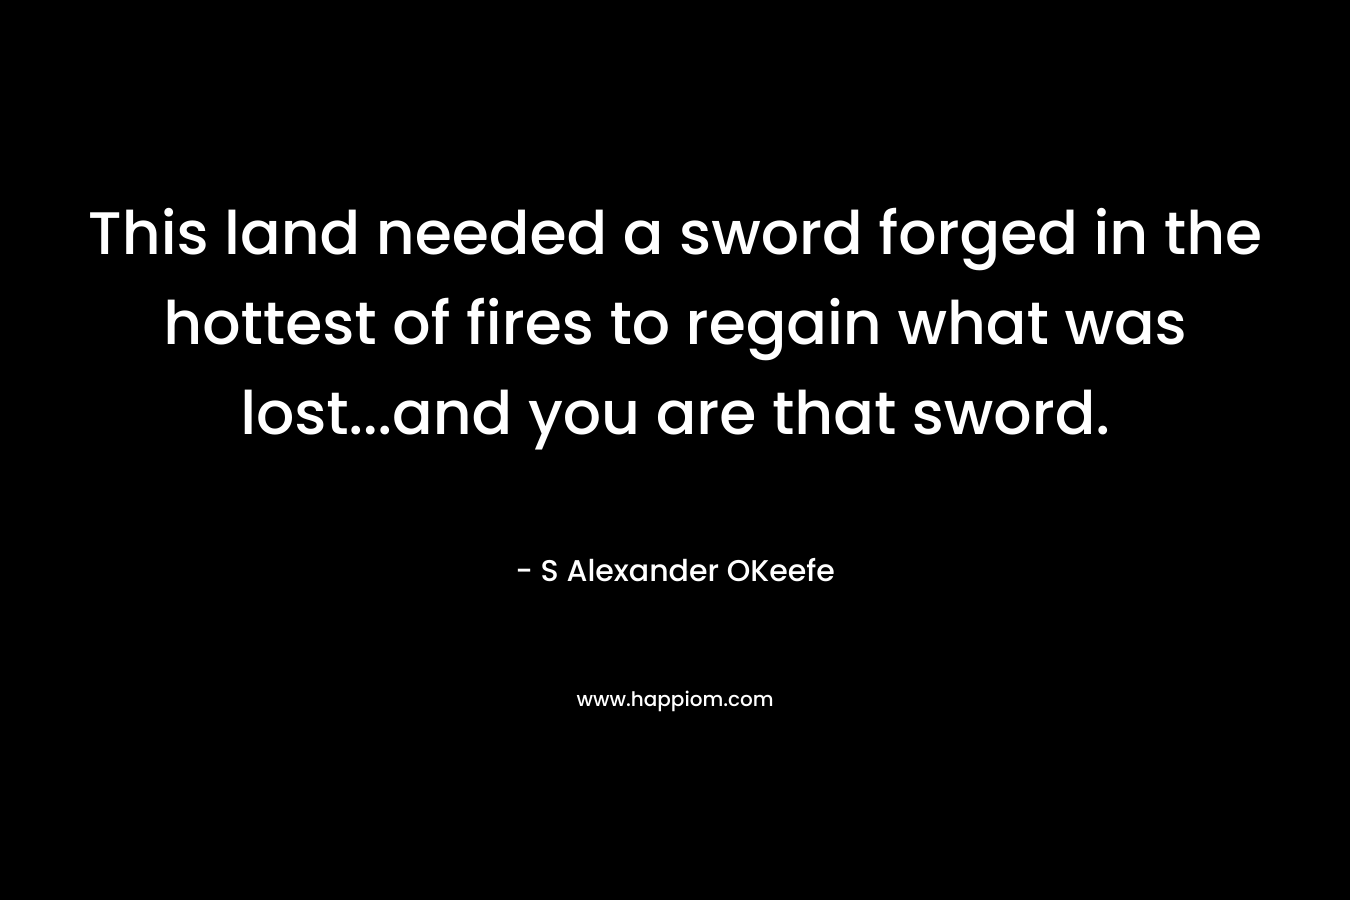 This land needed a sword forged in the hottest of fires to regain what was lost…and you are that sword. – S Alexander OKeefe